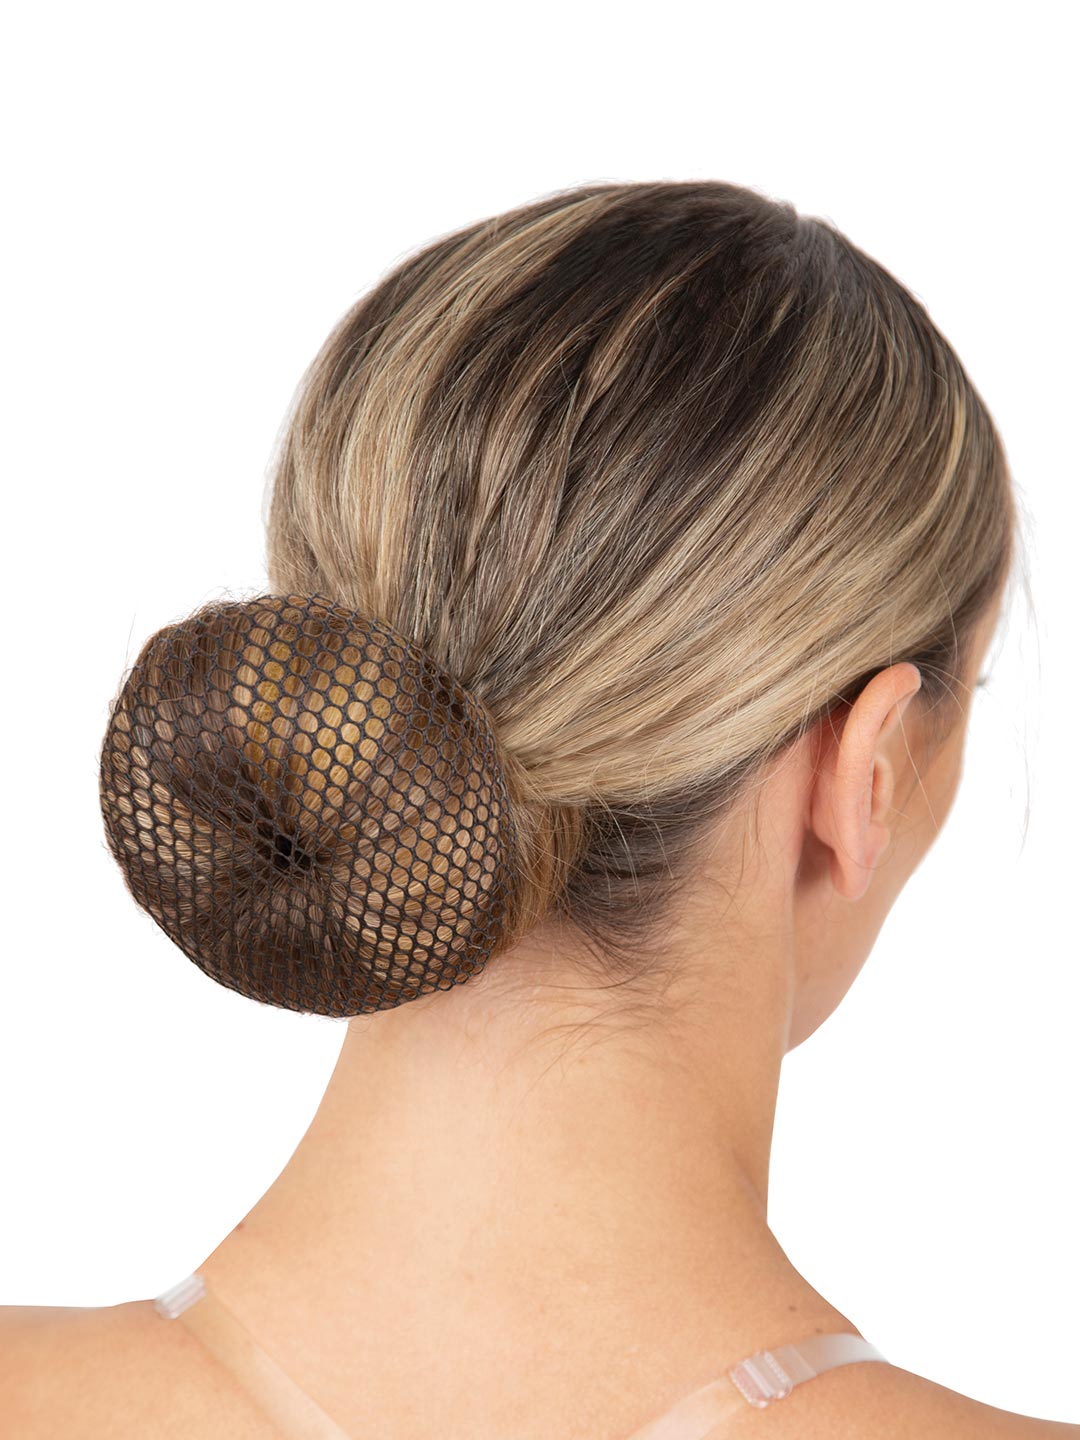 Hair Net Bun Cover Cuts Down on Styling Time | Capezio®